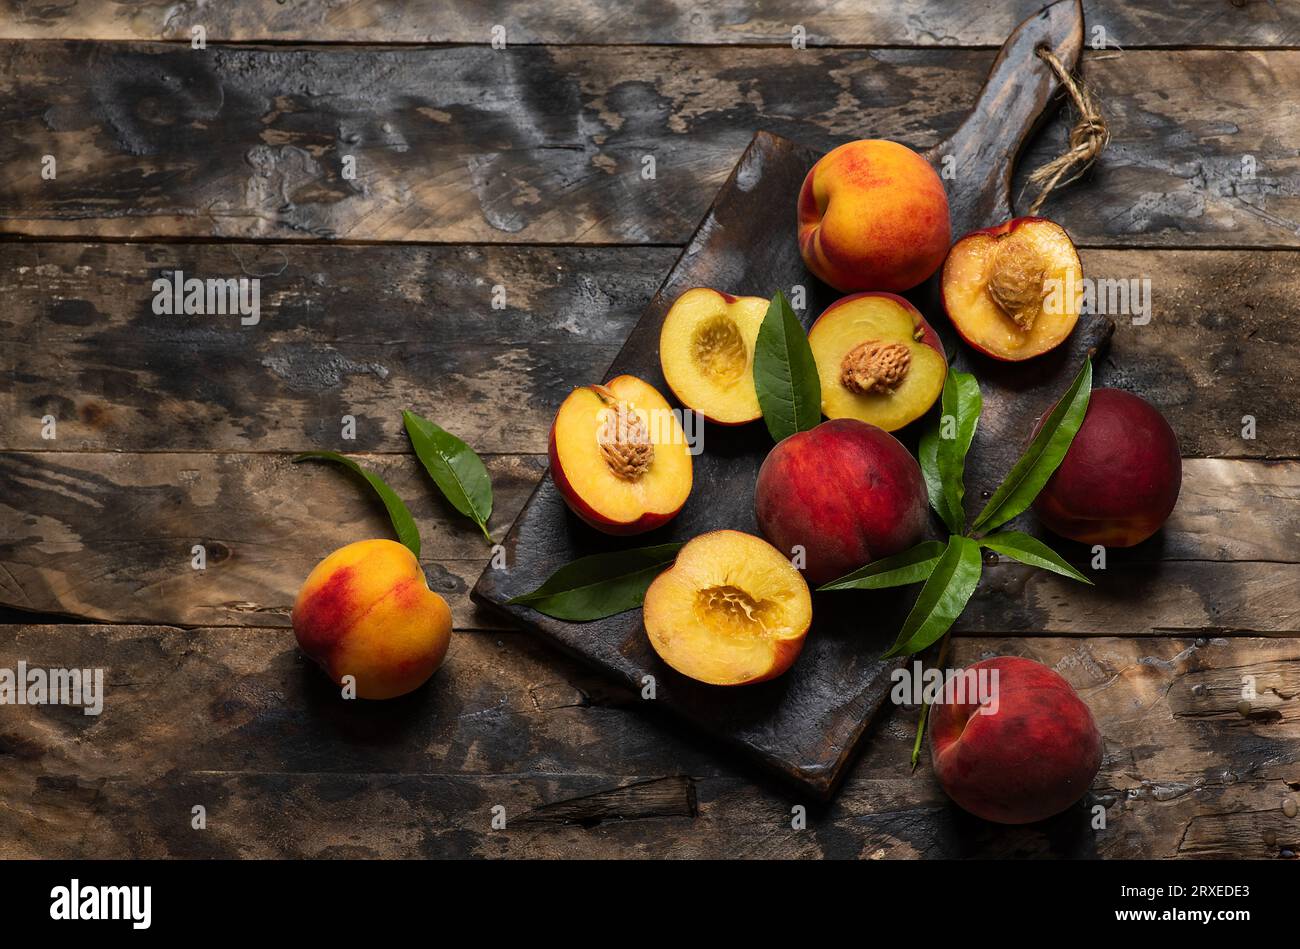 Fresh ripe dark red peaches with leaves on cutting board and wooden table. Whole fruits and halves of juicy, bright orange delicious peaches on the in Stock Photo